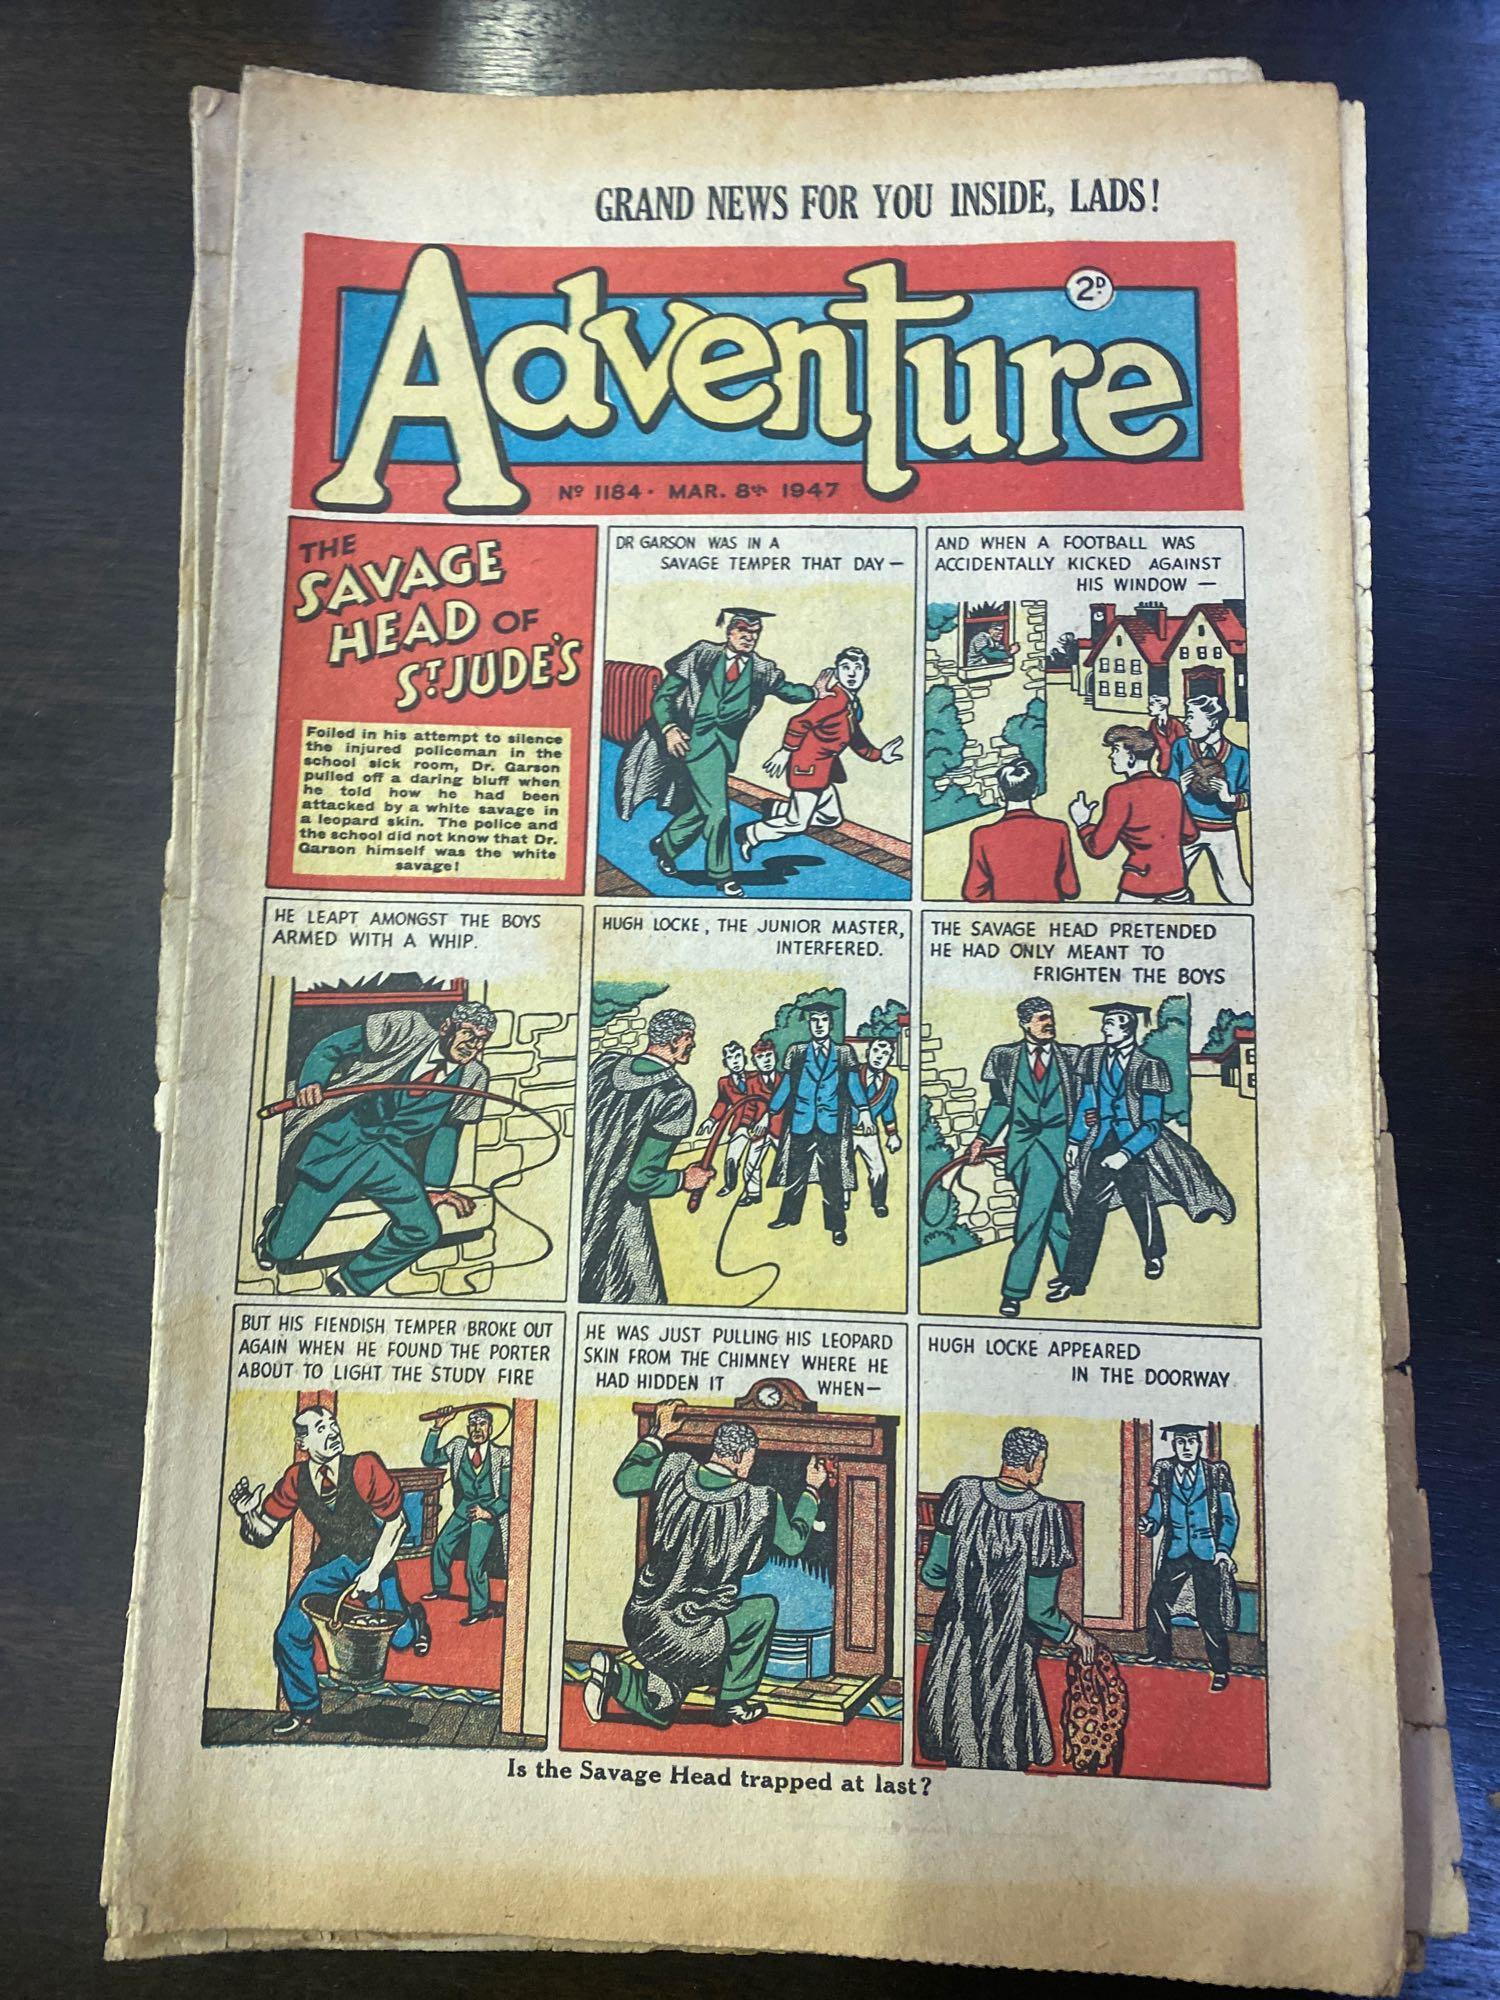 A quantity of vintage comics and childrens newspapers - Image 109 of 124